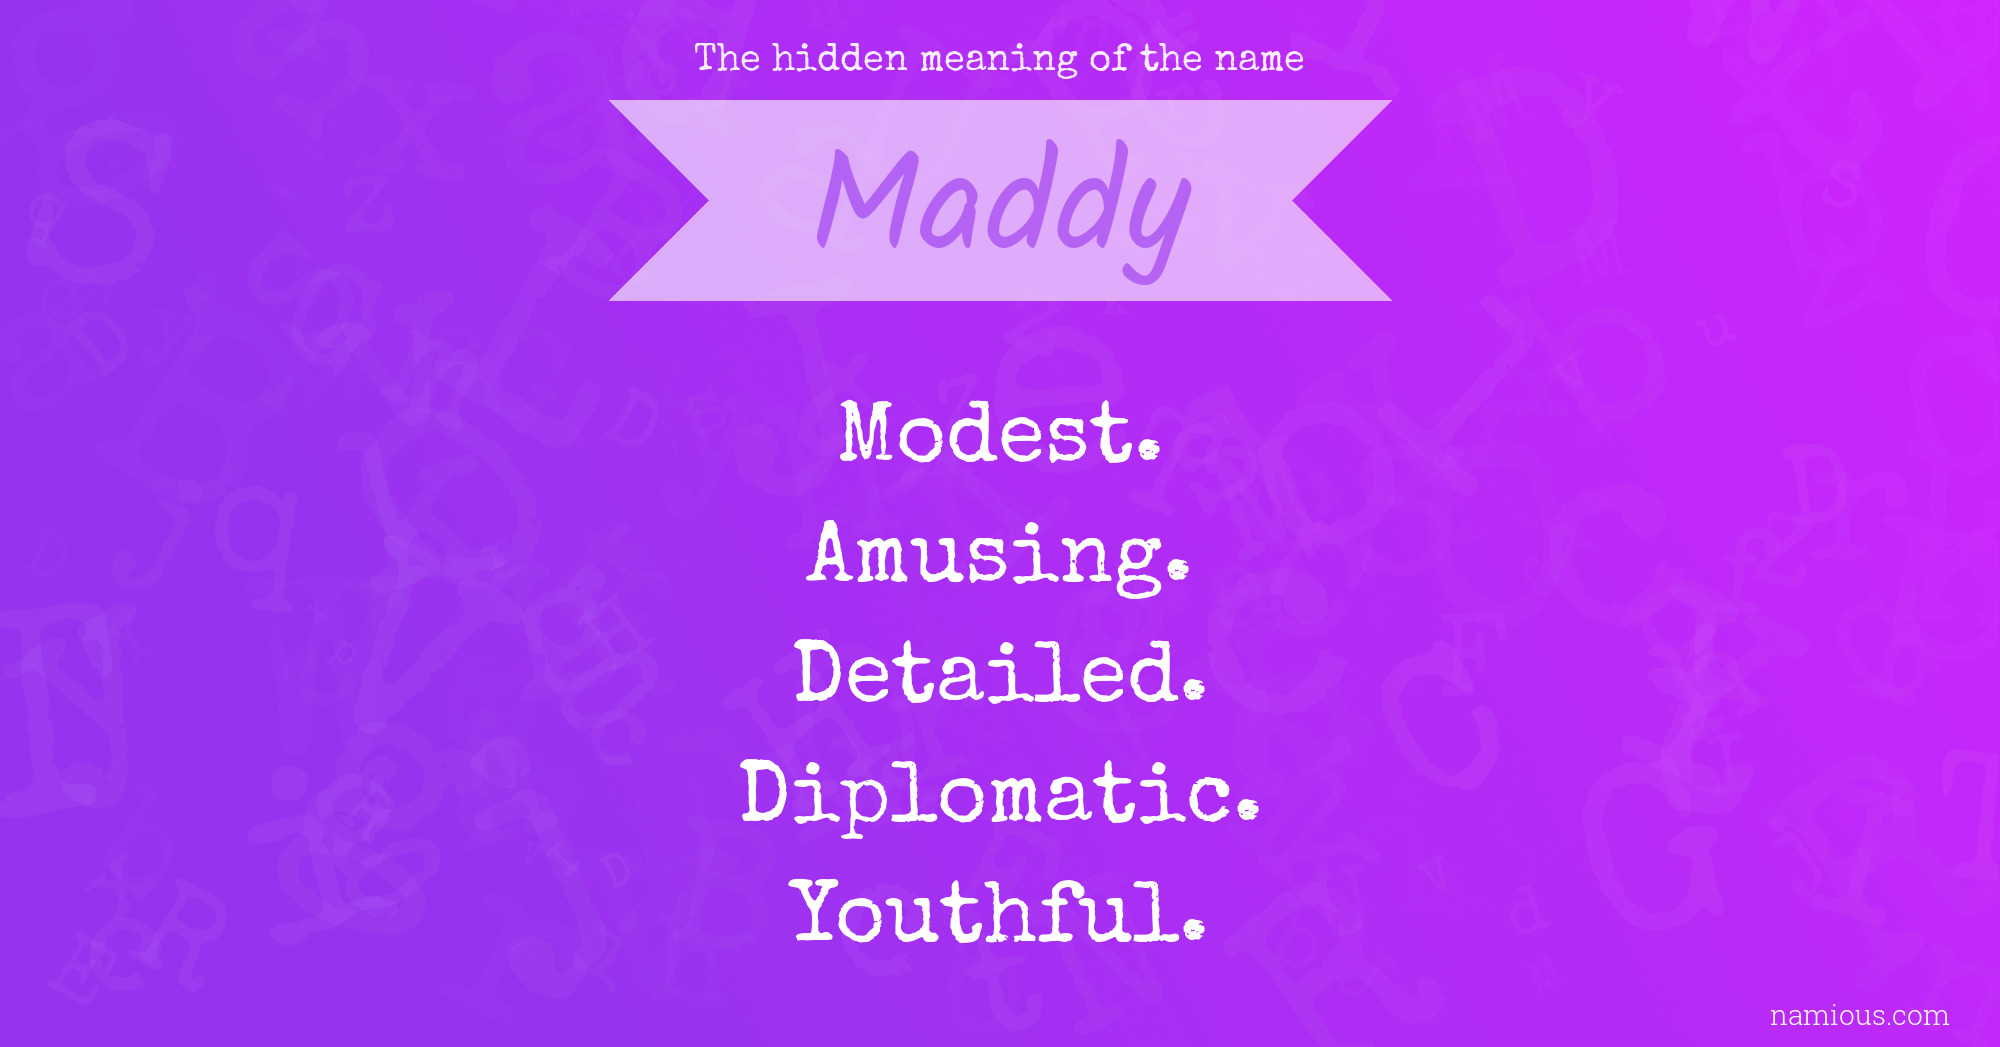 The hidden meaning of the name Maddy